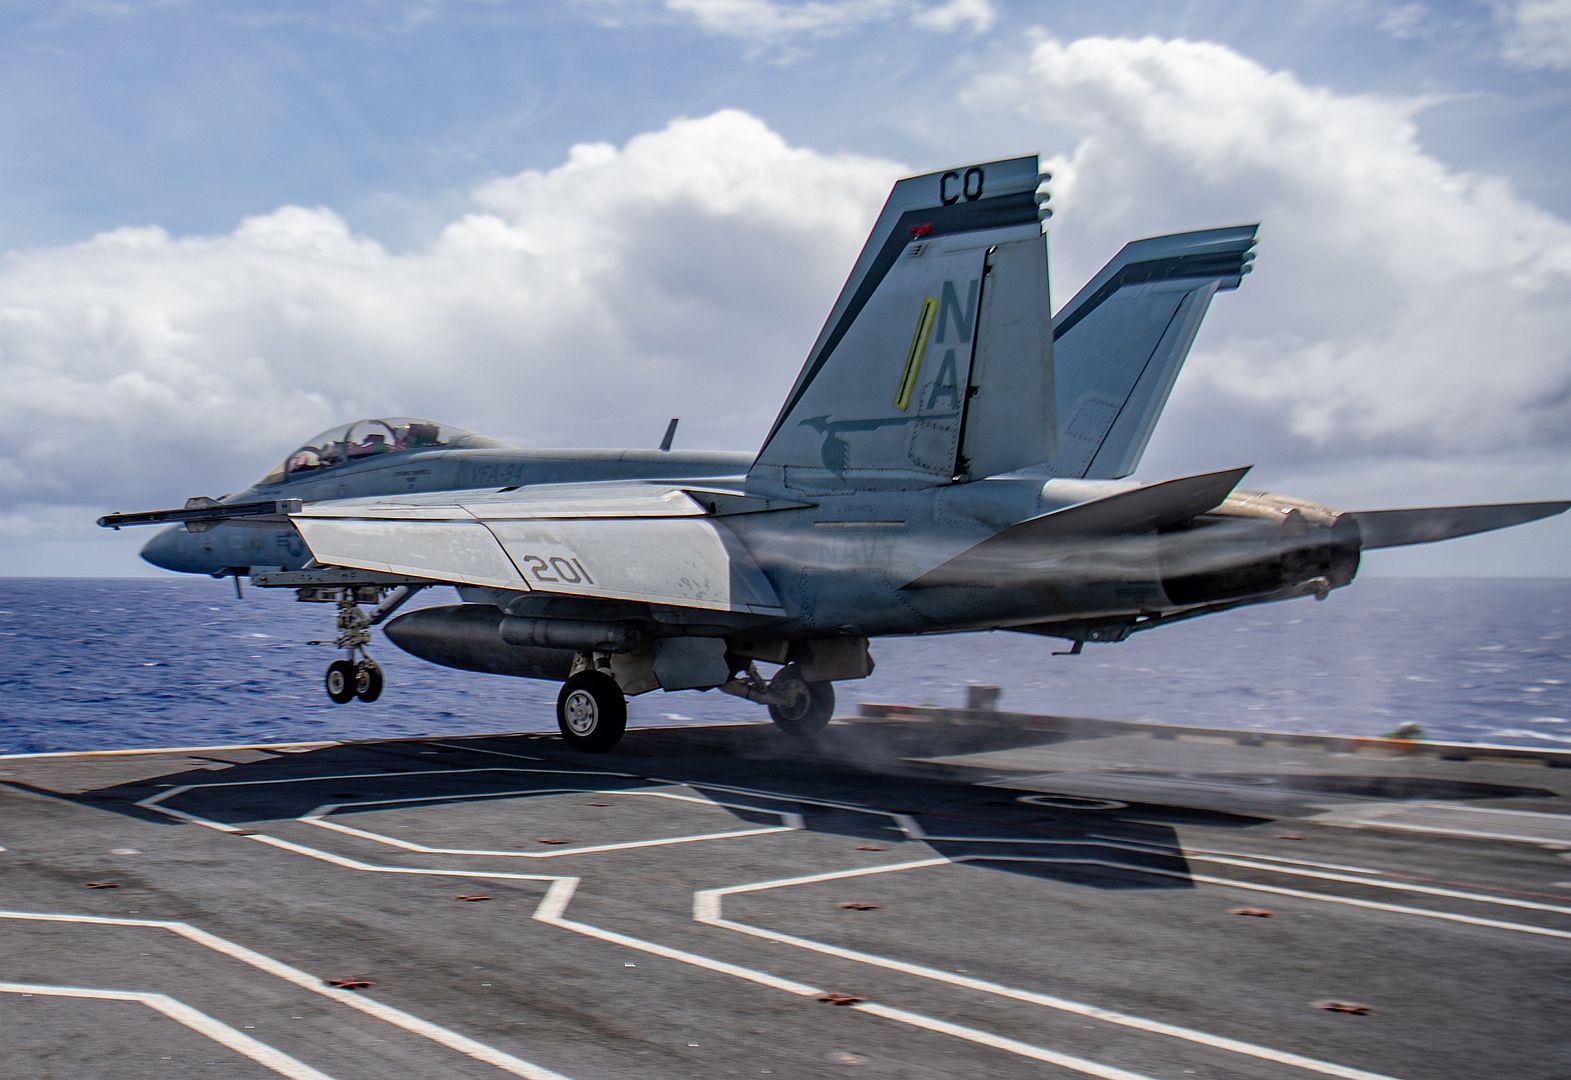  94 Launches From The Flight Deck Of The Aircraft Carrier USS Nimitz